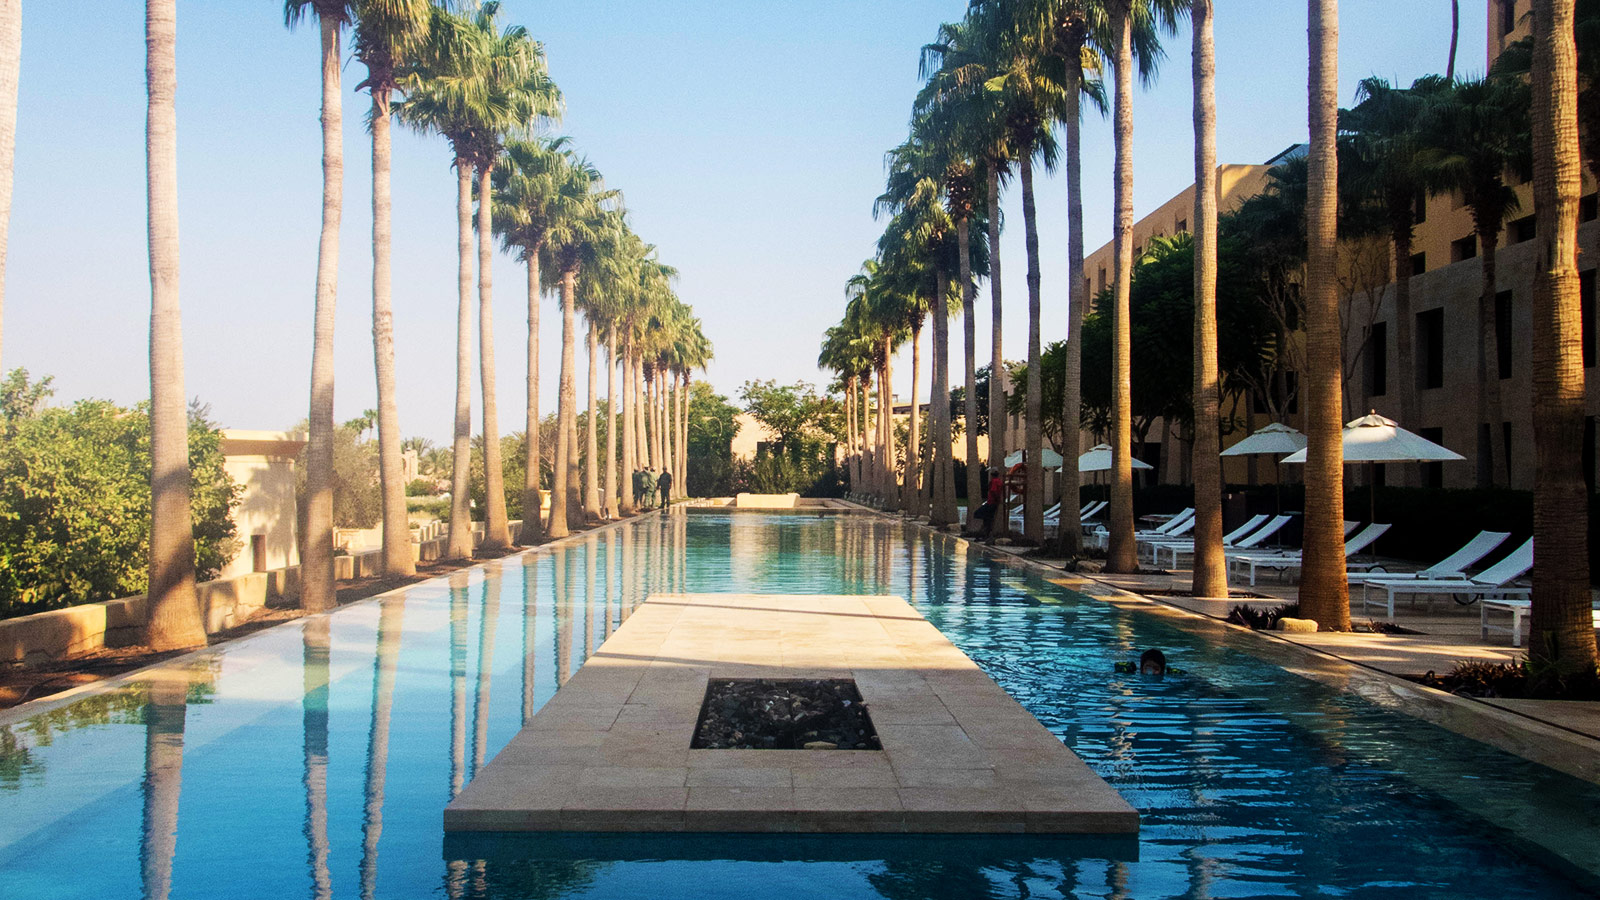 A long pool lined with tall palm tree's with a fire pit in the middle.